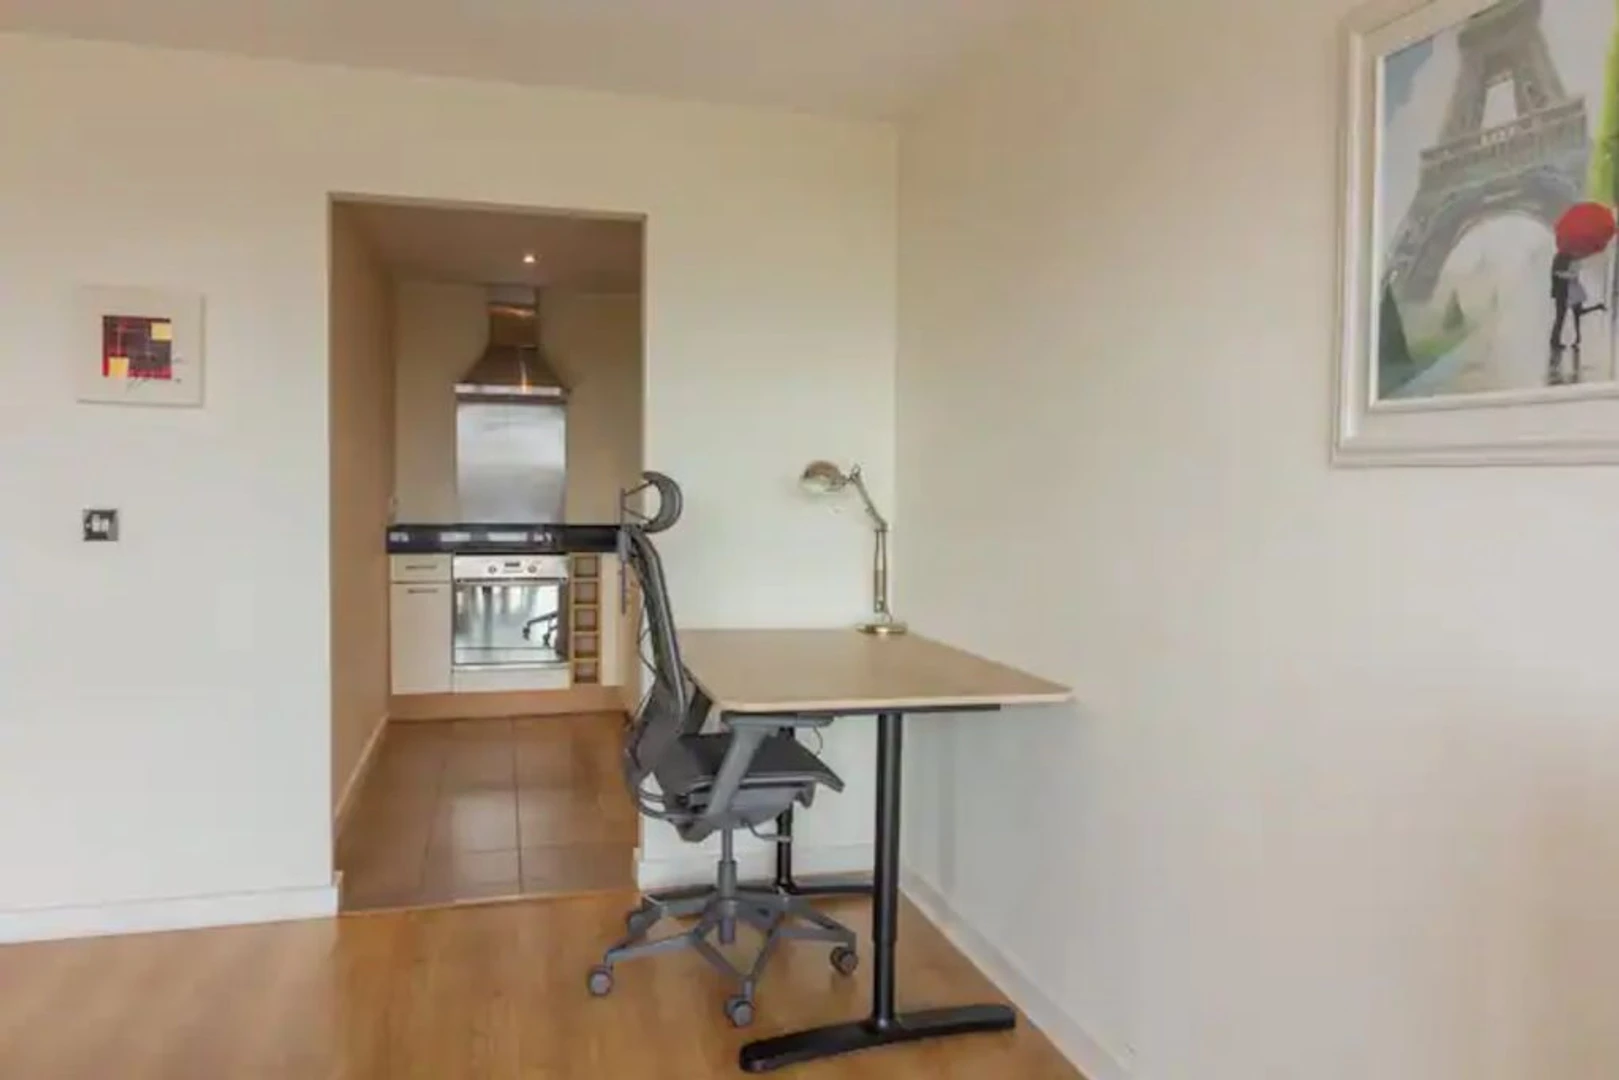 Two bedroom accommodation in Dublin